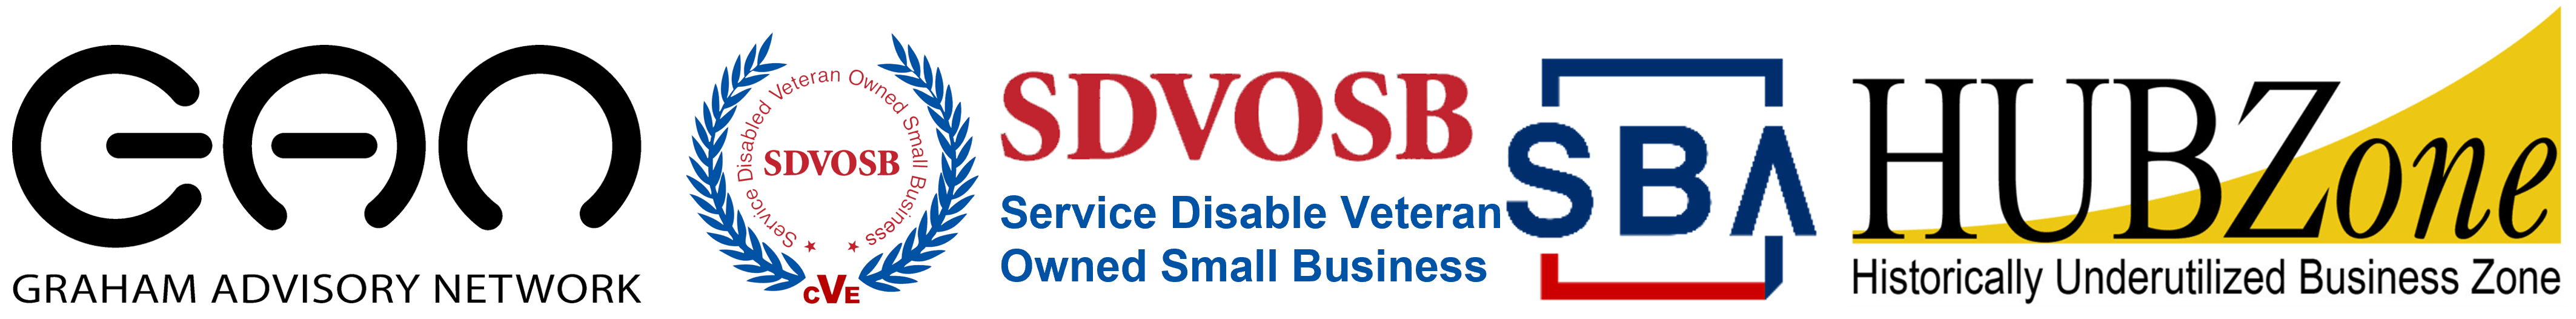 GAN Inc. Graham Advisory Network Incorporated is a SBA Certified Service Disabled Veteran Owned Small Business and HUBZone Company.